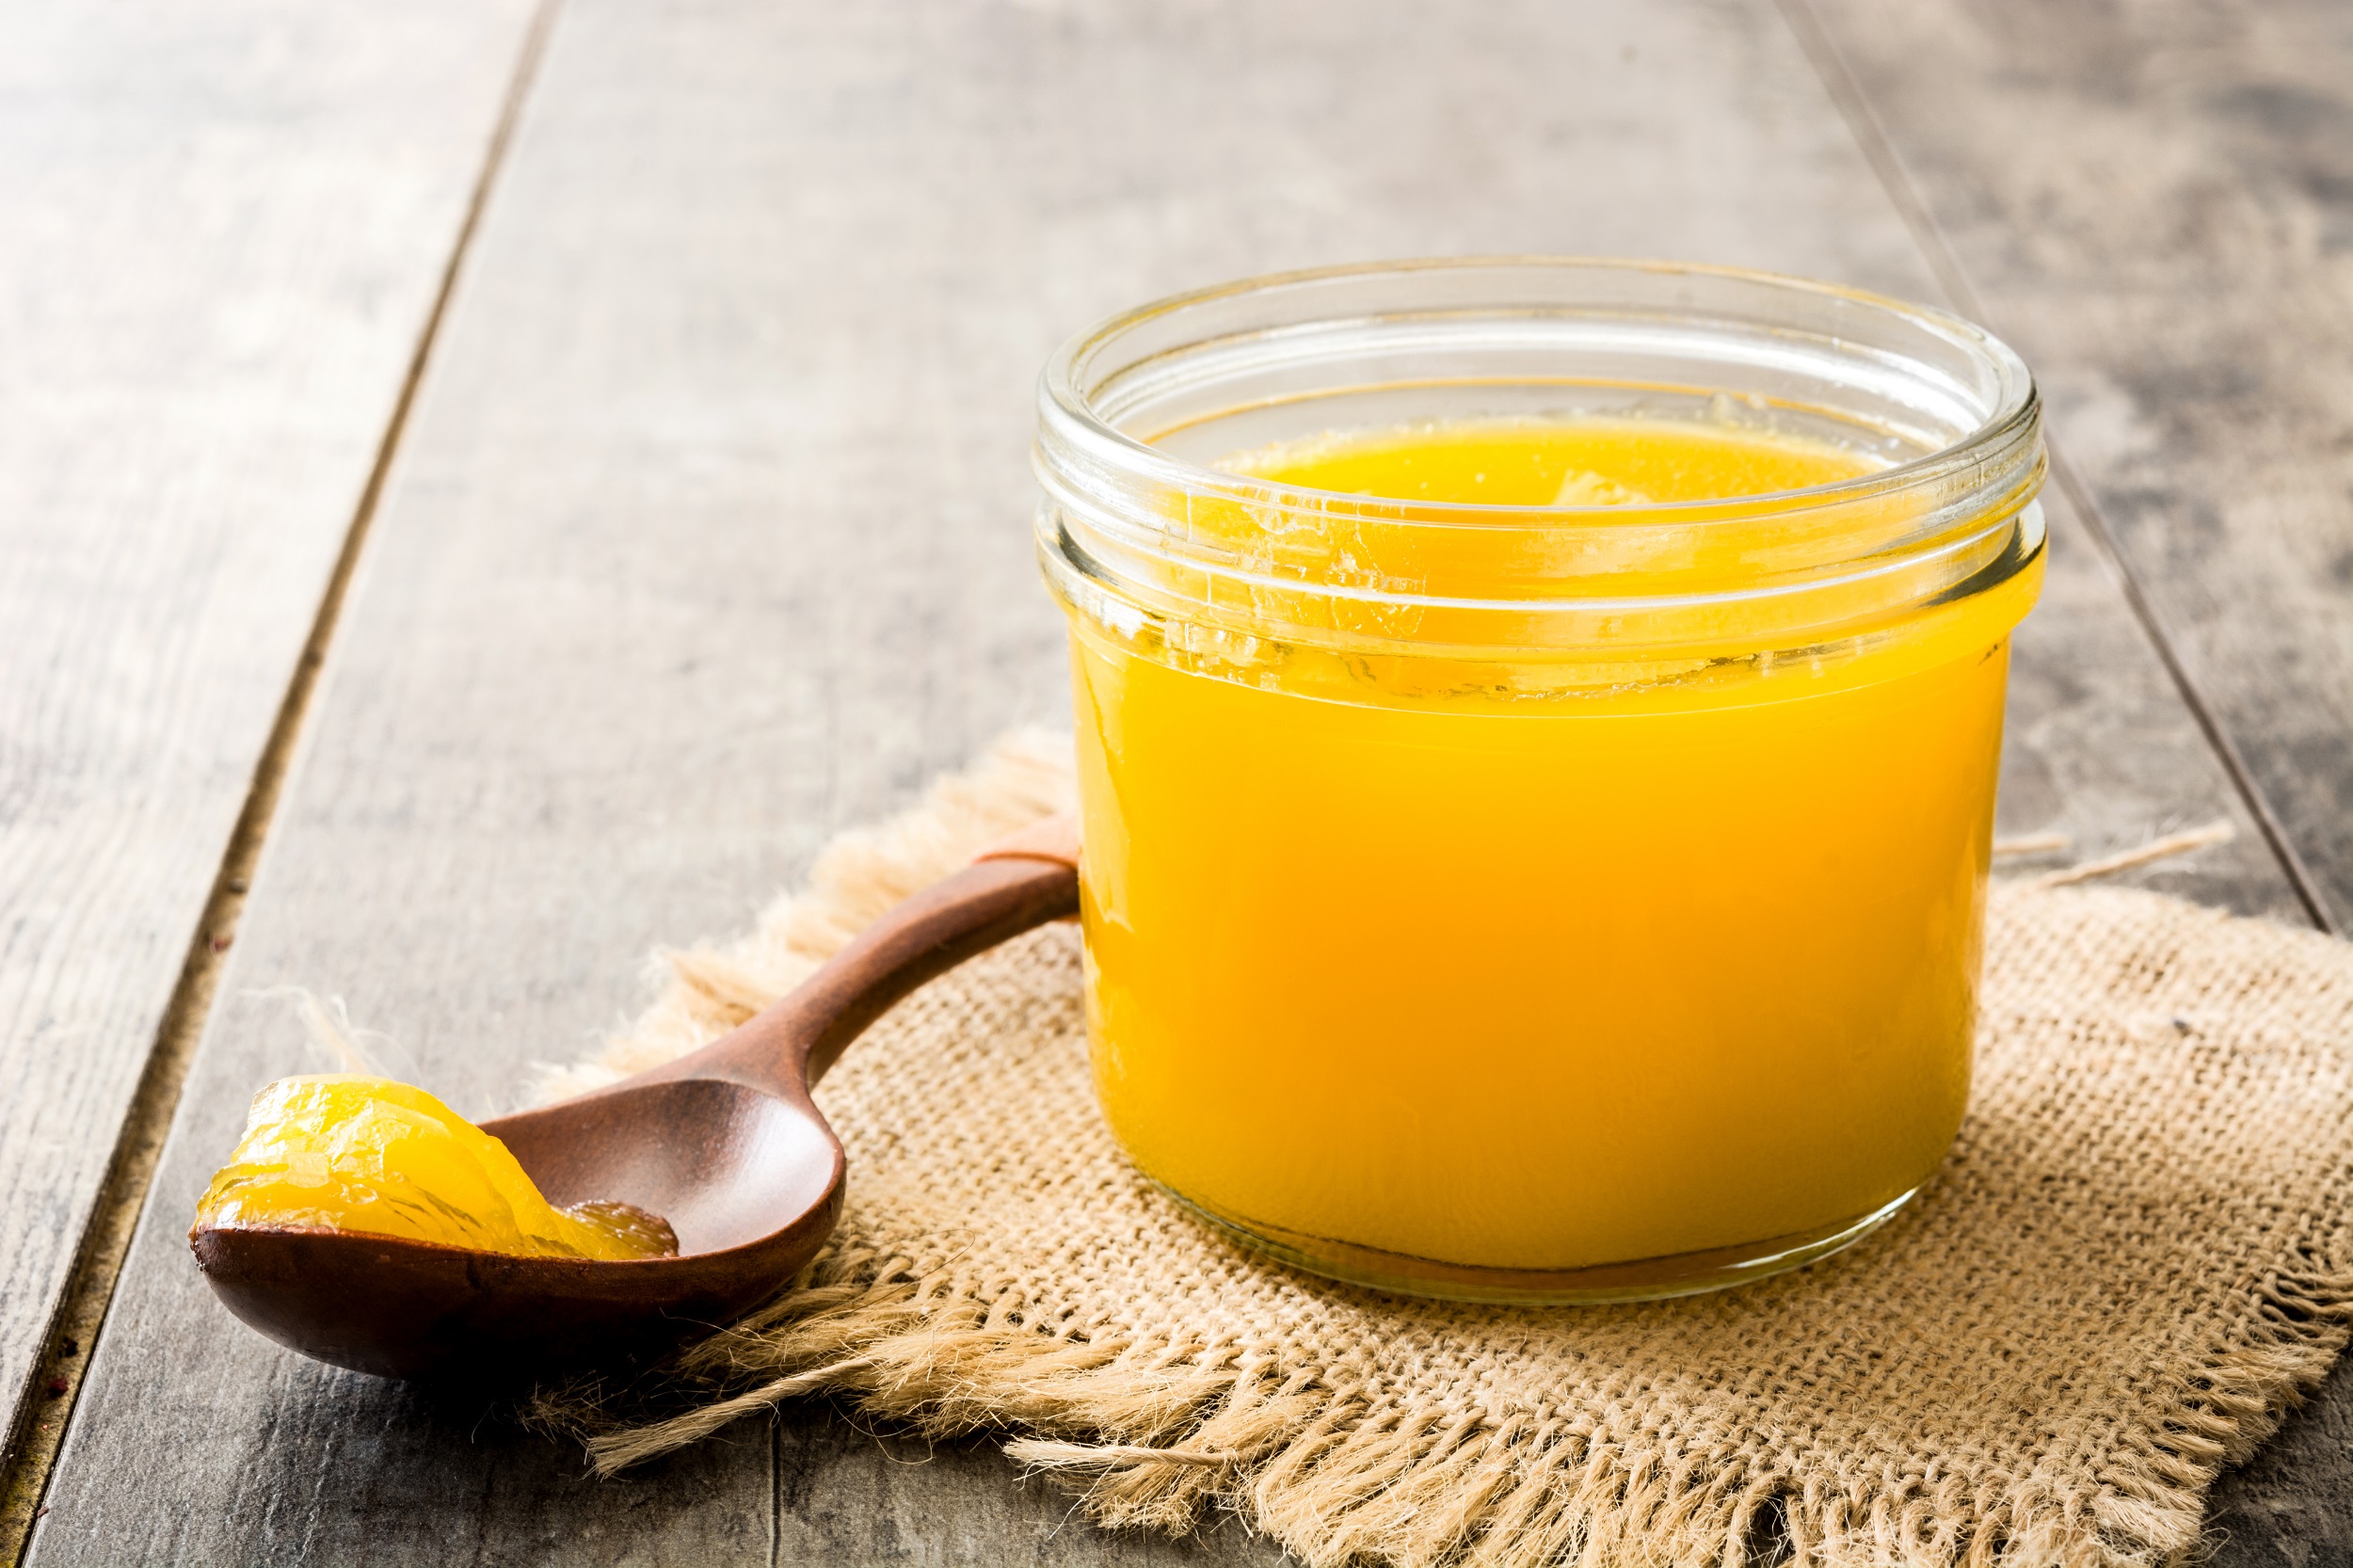 Where to Find High Quality Ghee in Dubai